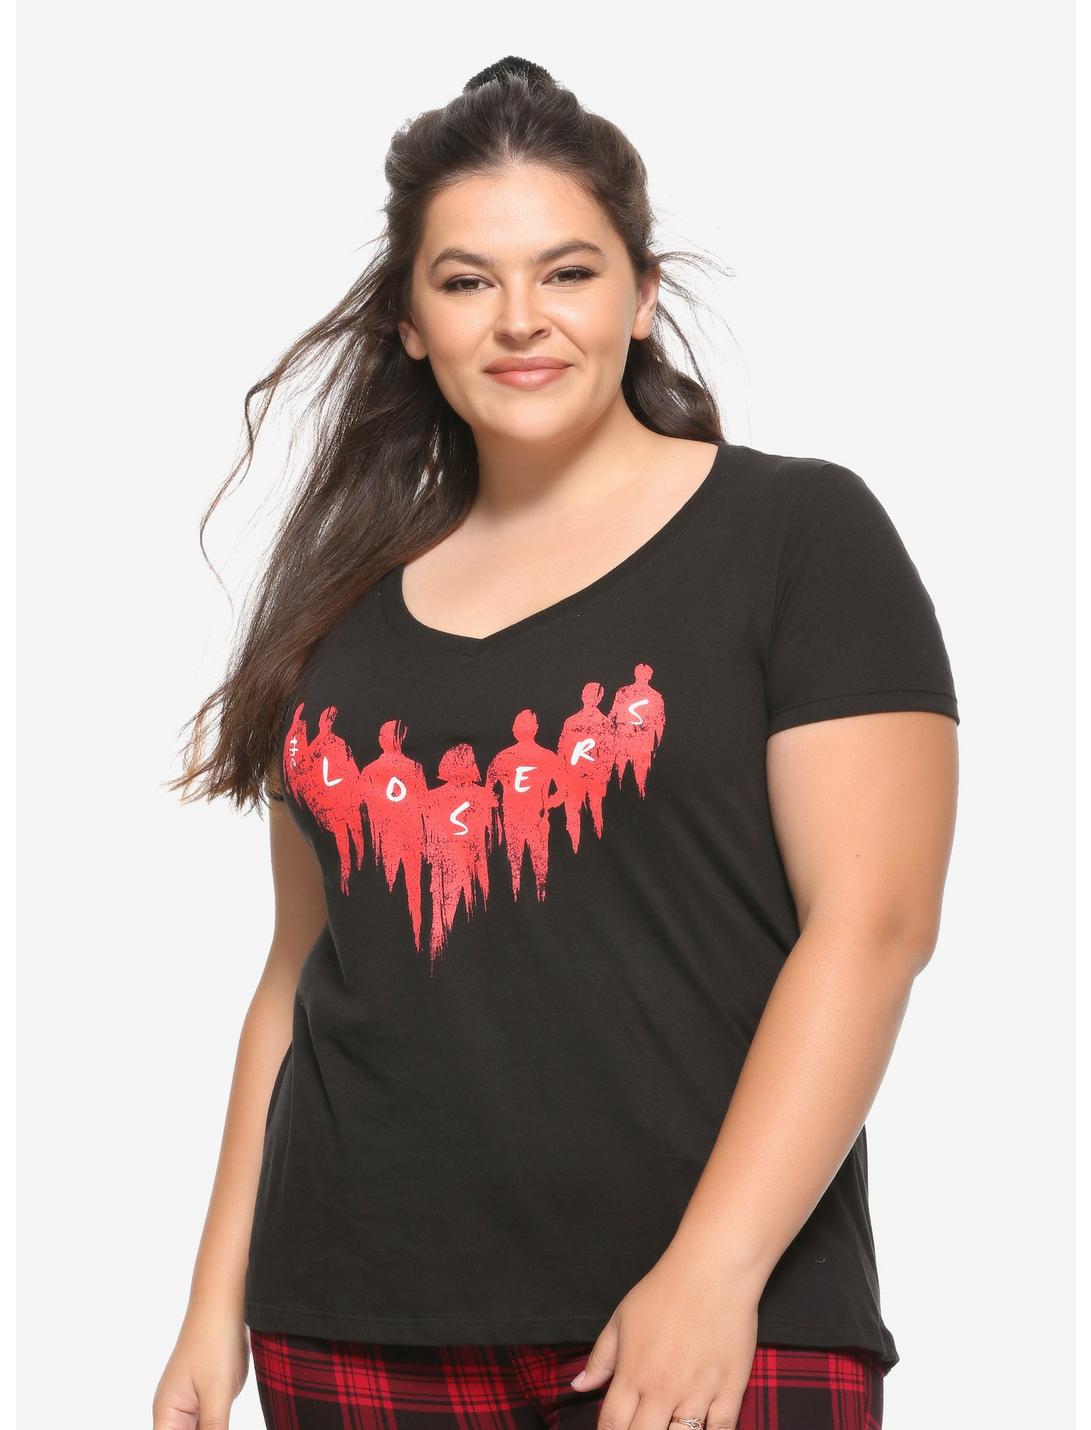 IT Chapter Two The Losers Items Girls T-Shirt Plus Size, MULTI, hi-res